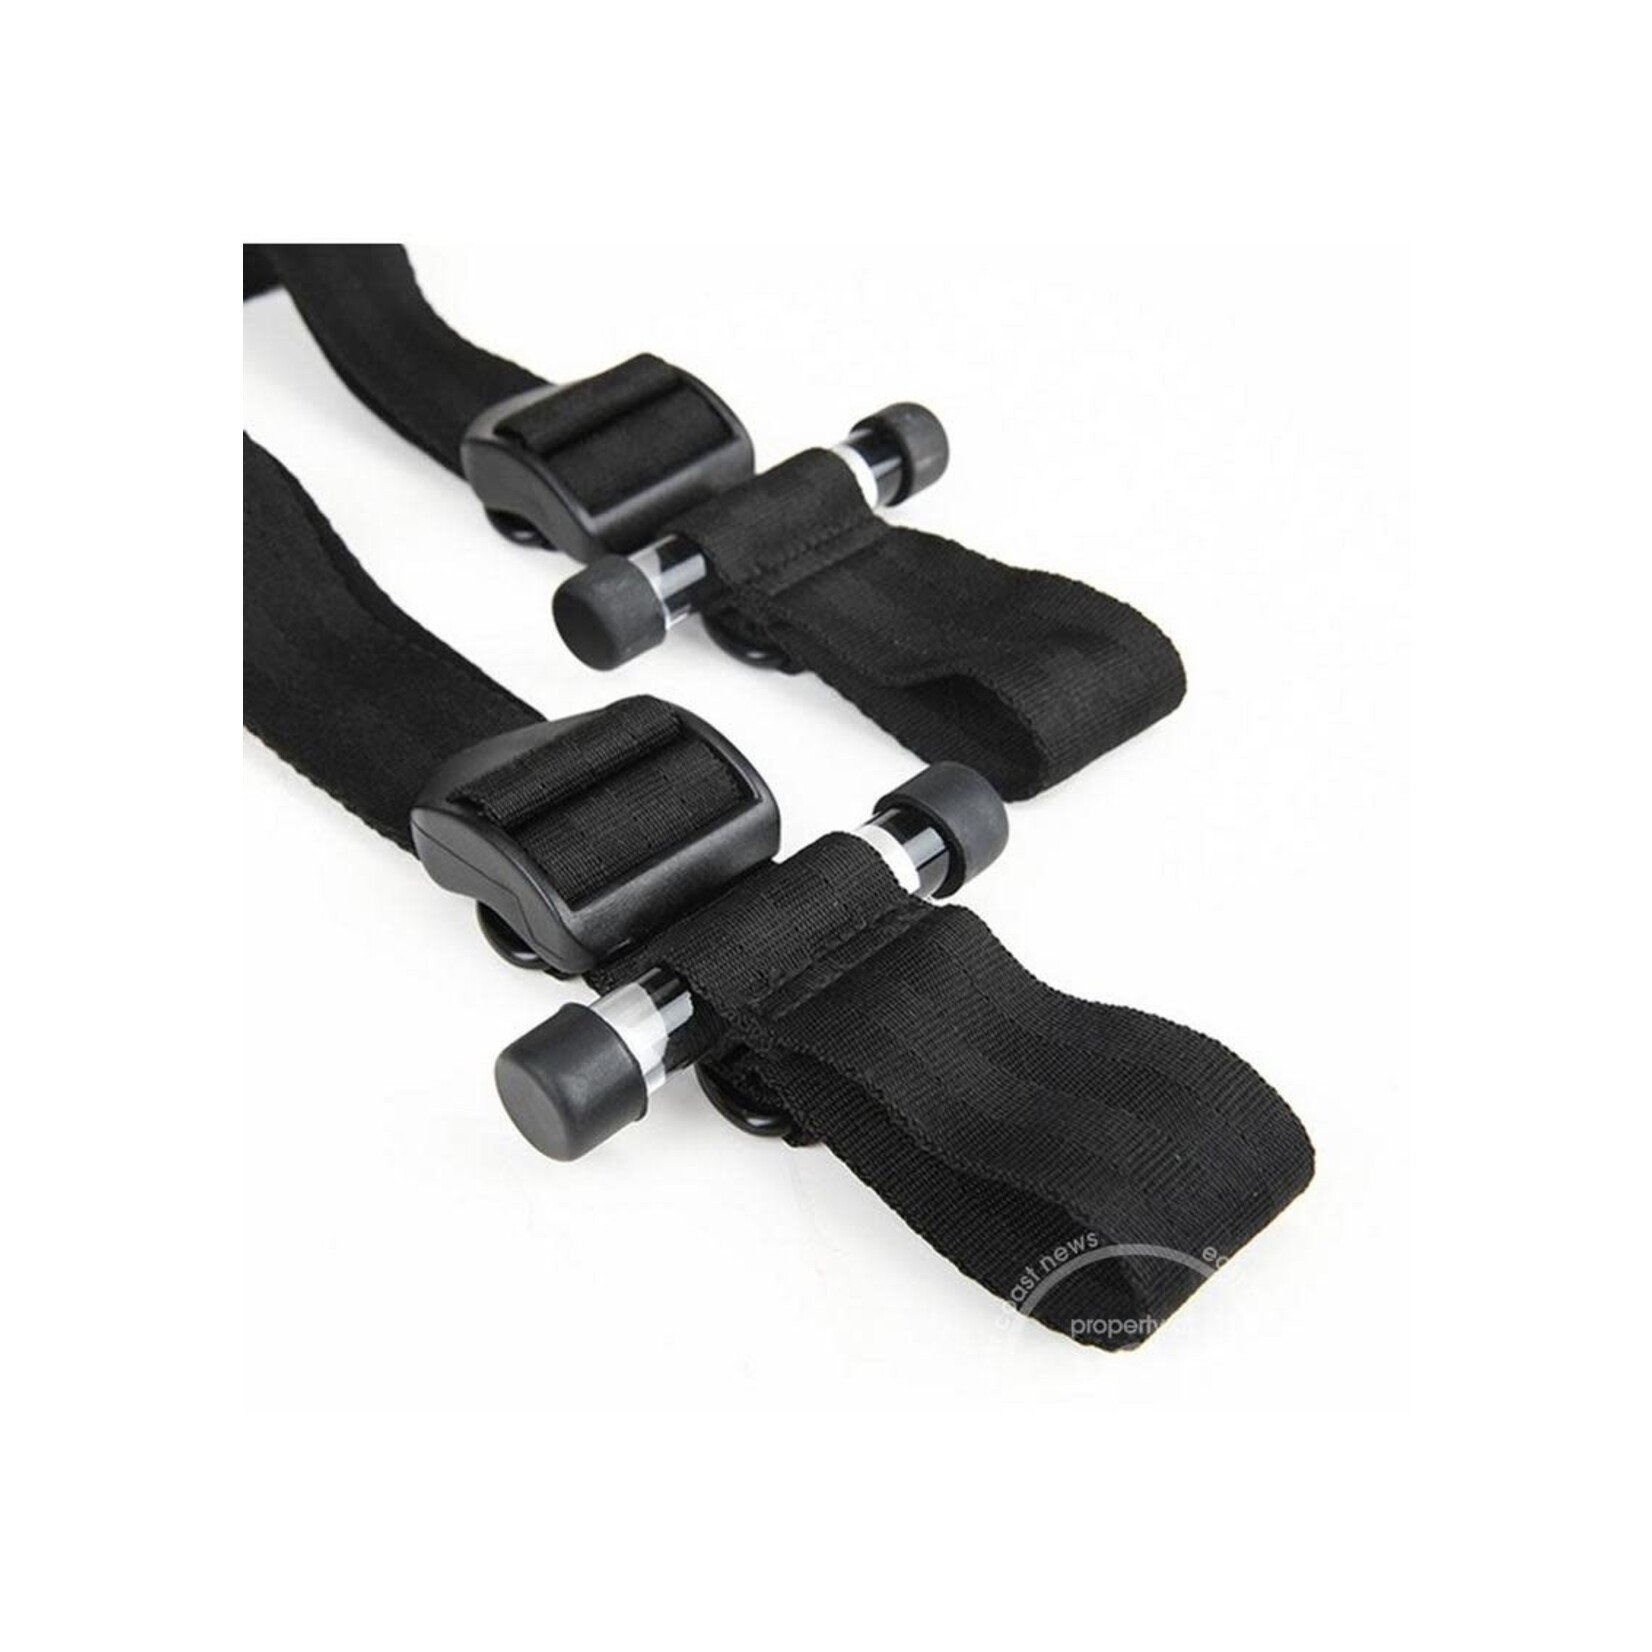 Lux Fetish Over The Door Cross With 4 Universal Soft Restraint Cuffs - Black